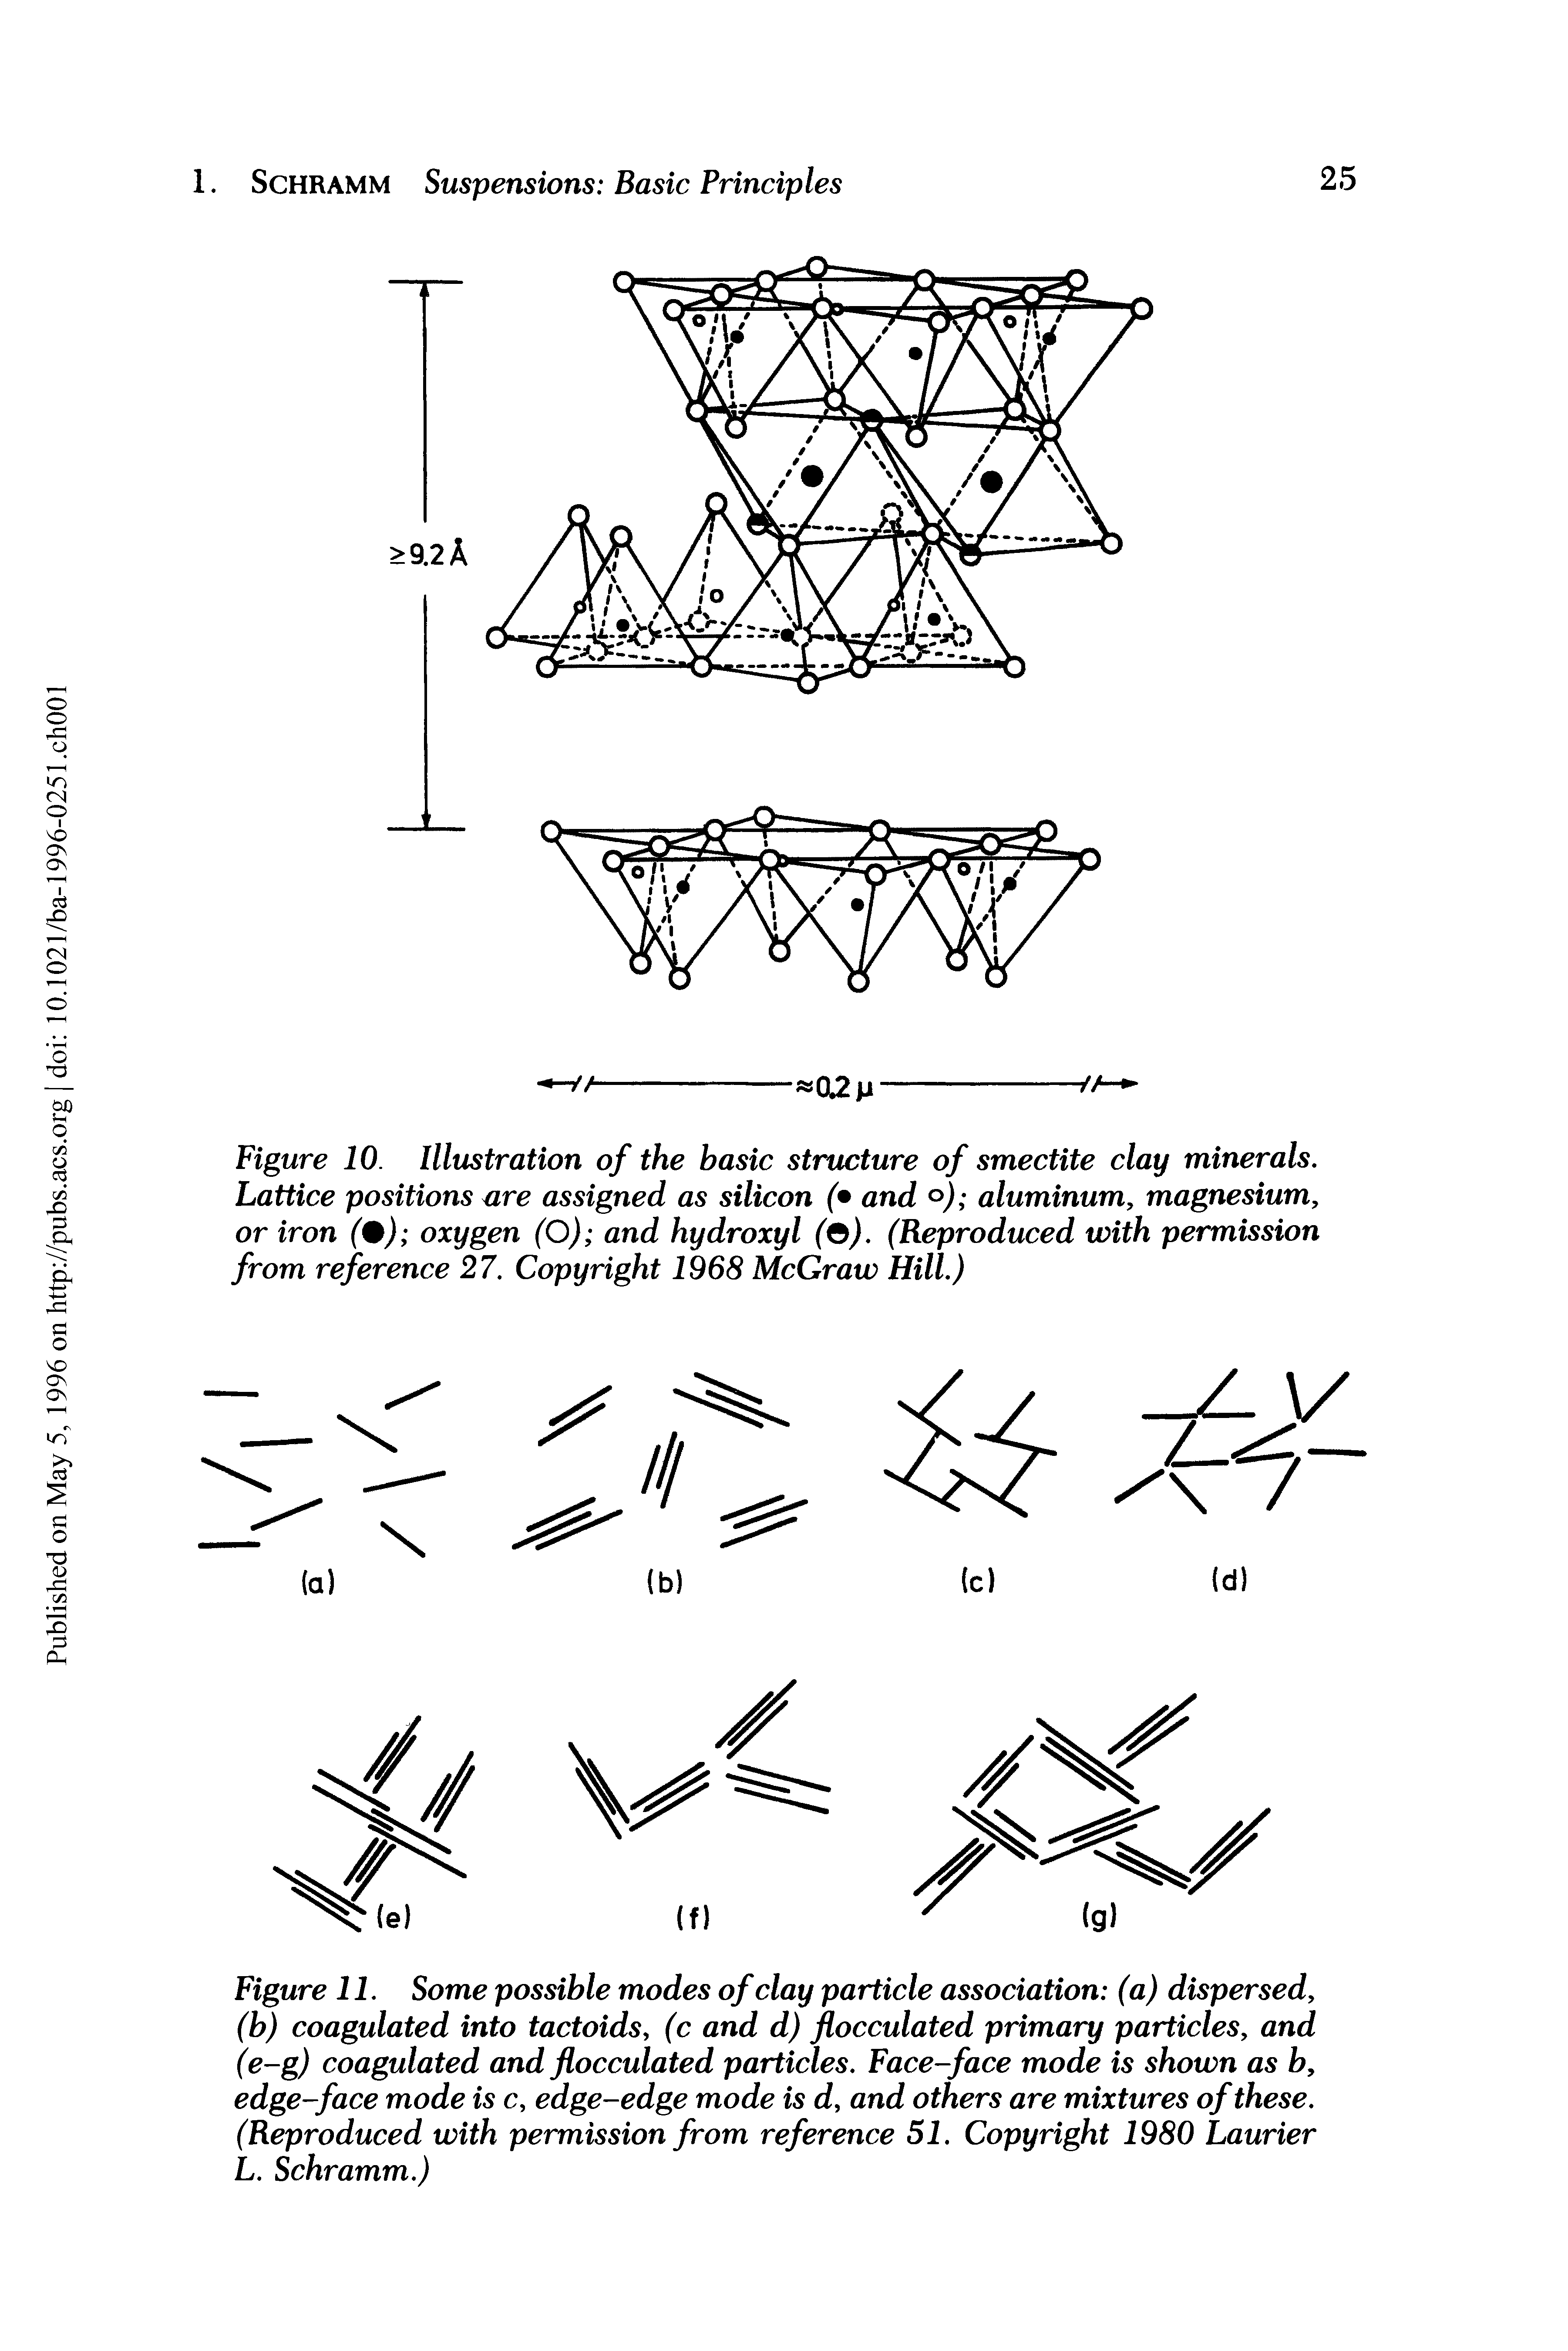 Figure 10. Illustration of the basic structure of smectite clay minerals. Lattice positions are assigned as silicon ( and °) aluminum, magnesium, or iron (0) oxygen (O) and hydroxyl ( ). (Reproduced with permission from reference 27. Copyright 1968 McGraw Hill.)...